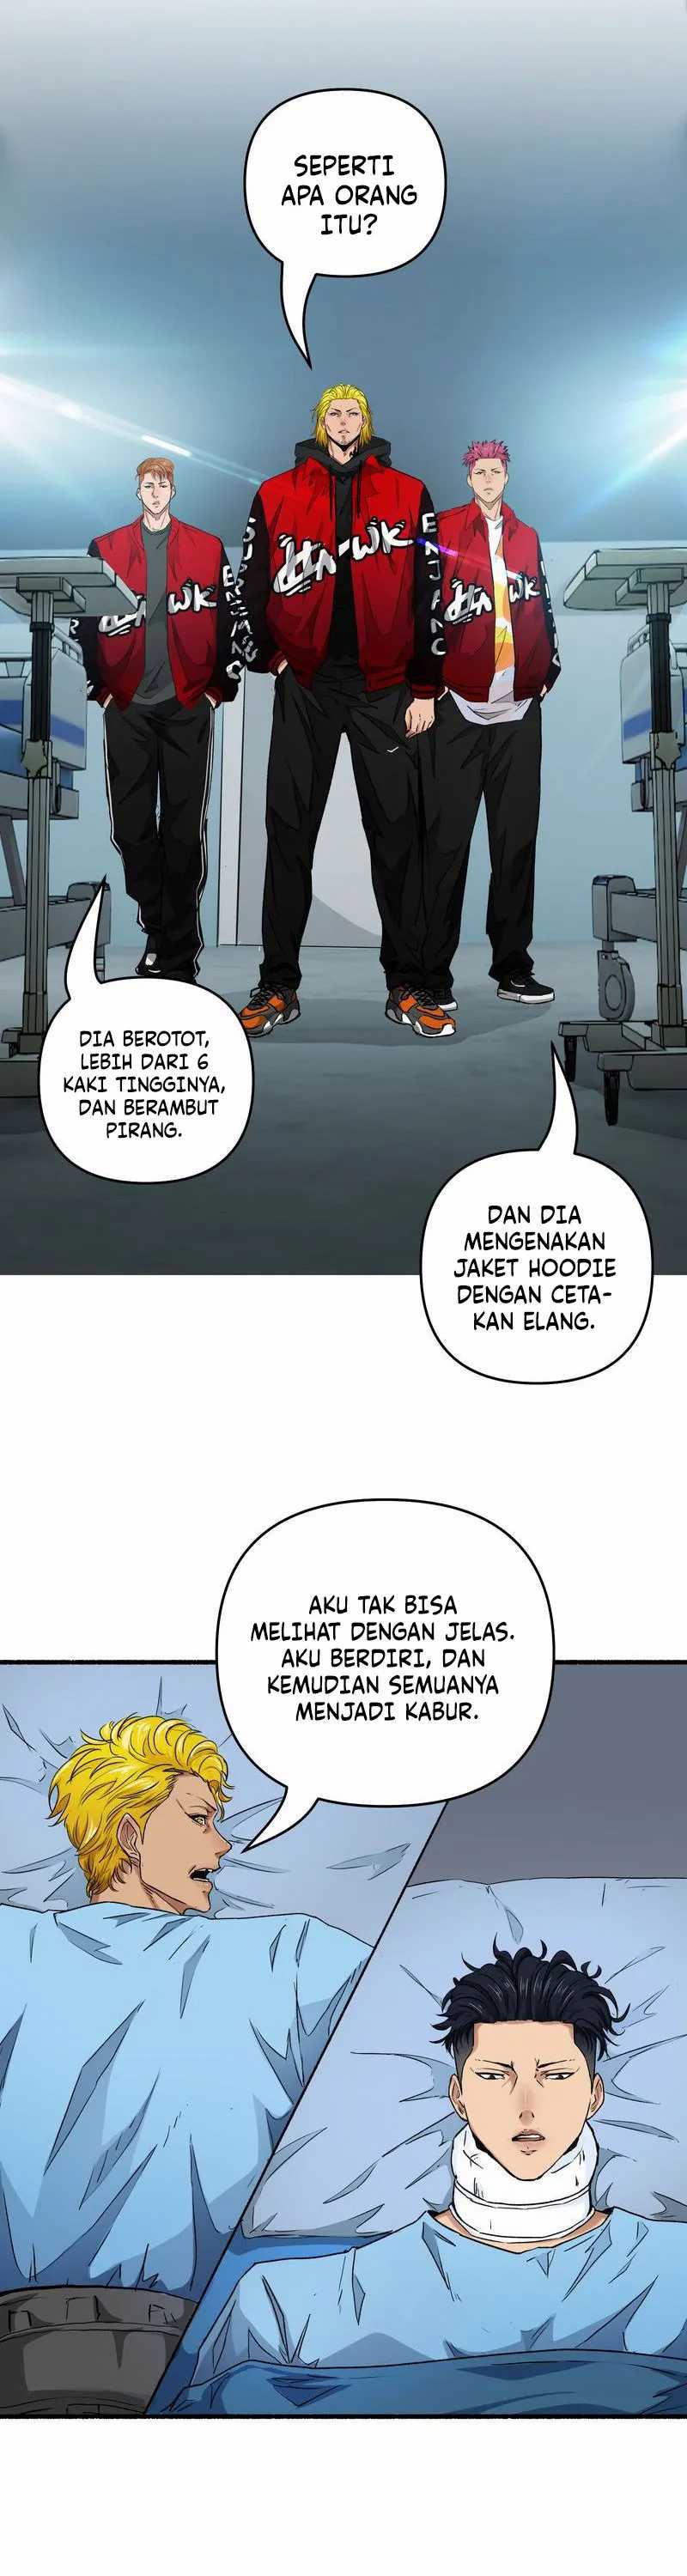 Death Speed Chapter 02